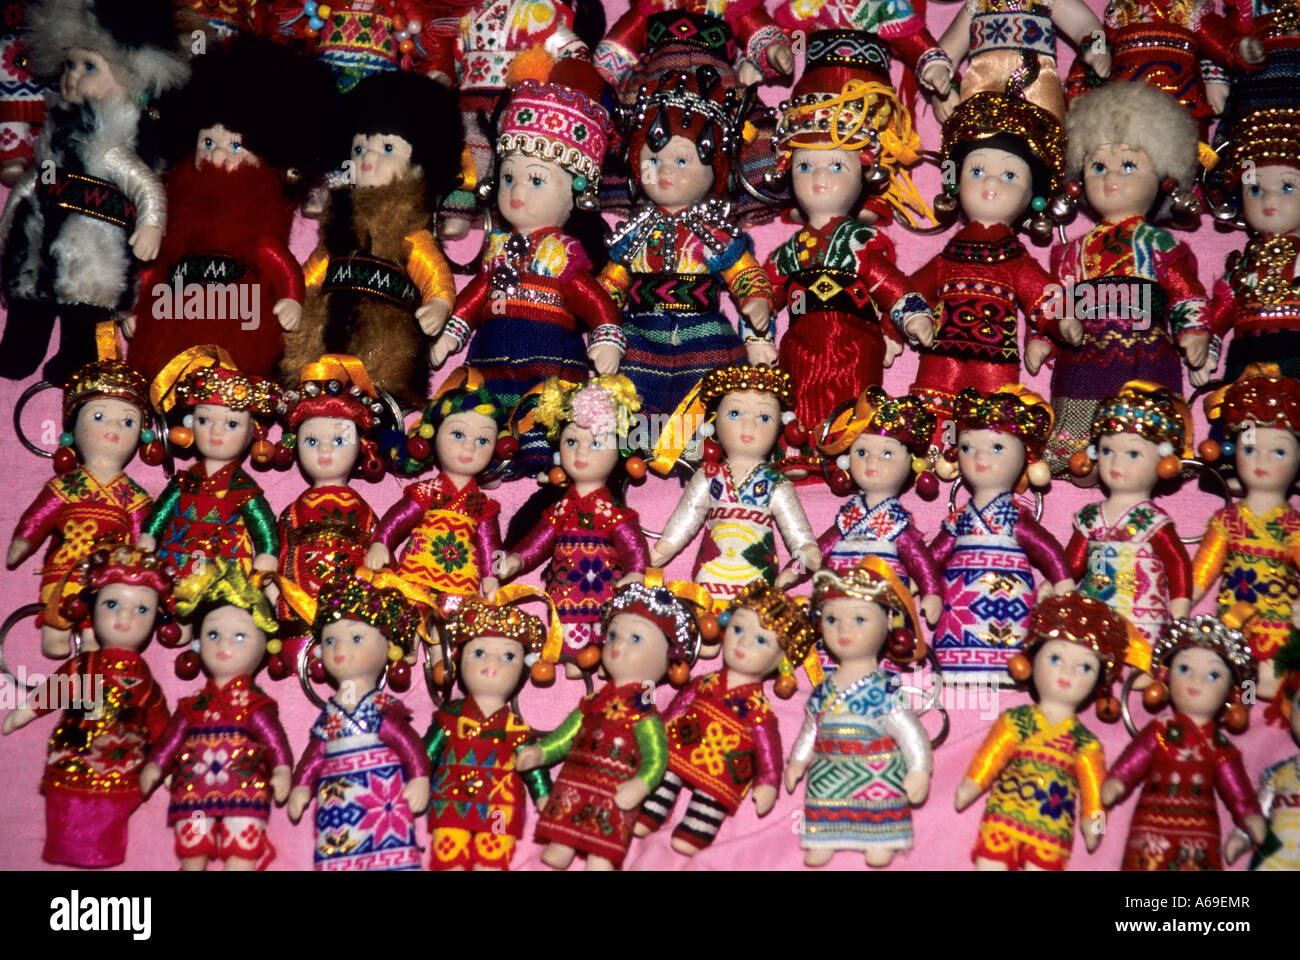 small dolls for sale